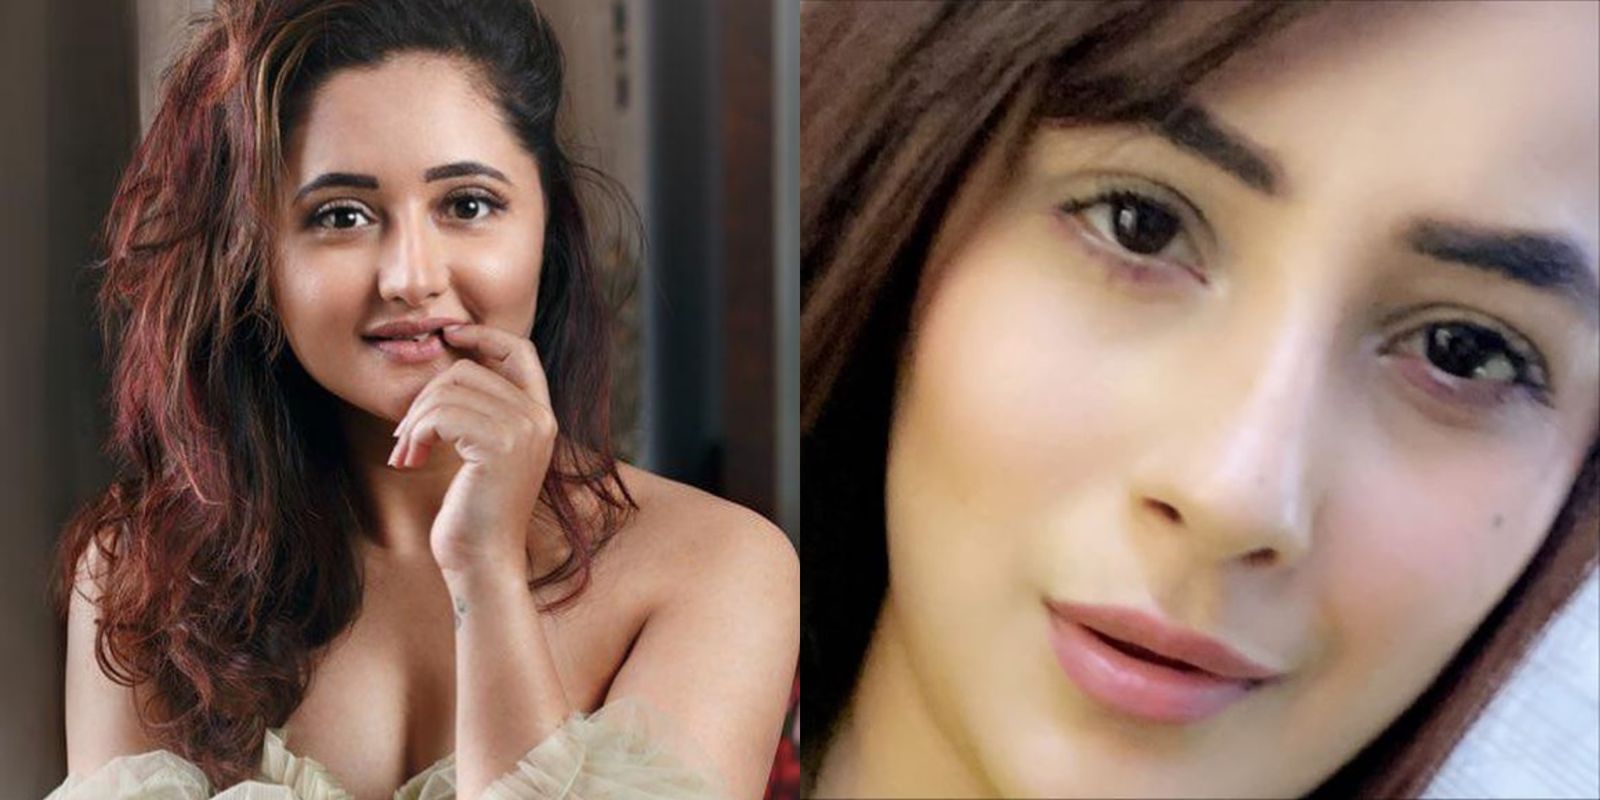 Rashami Desai And Shehnaaz Gill’s Latest Captivating Posts Won’t Let You Look Away